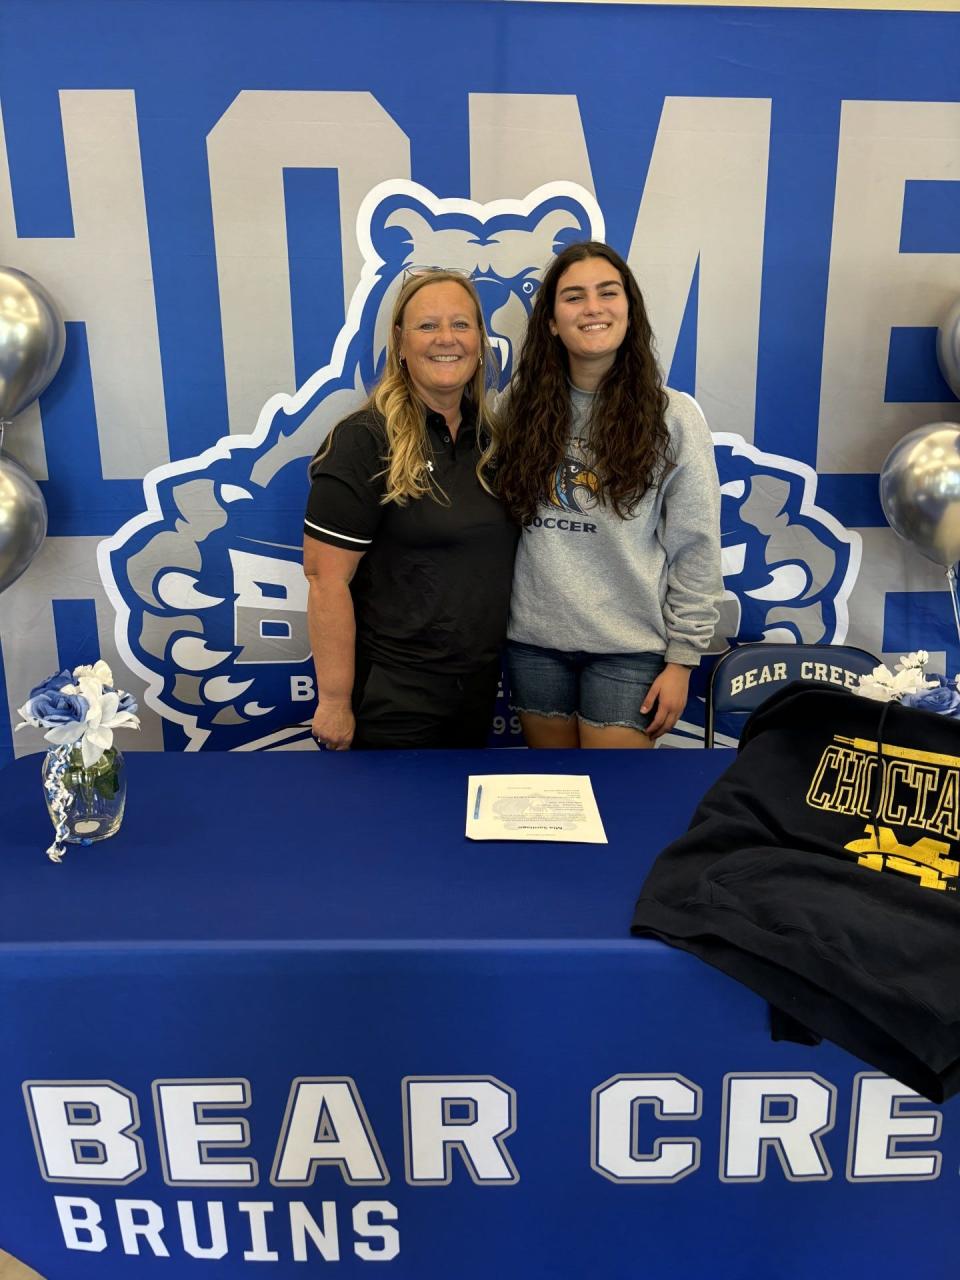 Bear Creek's Mia Santiago (left) poses for a photo next to Bear Creek's athletic director Darcy Altheide after signing her NLI to play soccer at Mississippi College this upcoming fall.